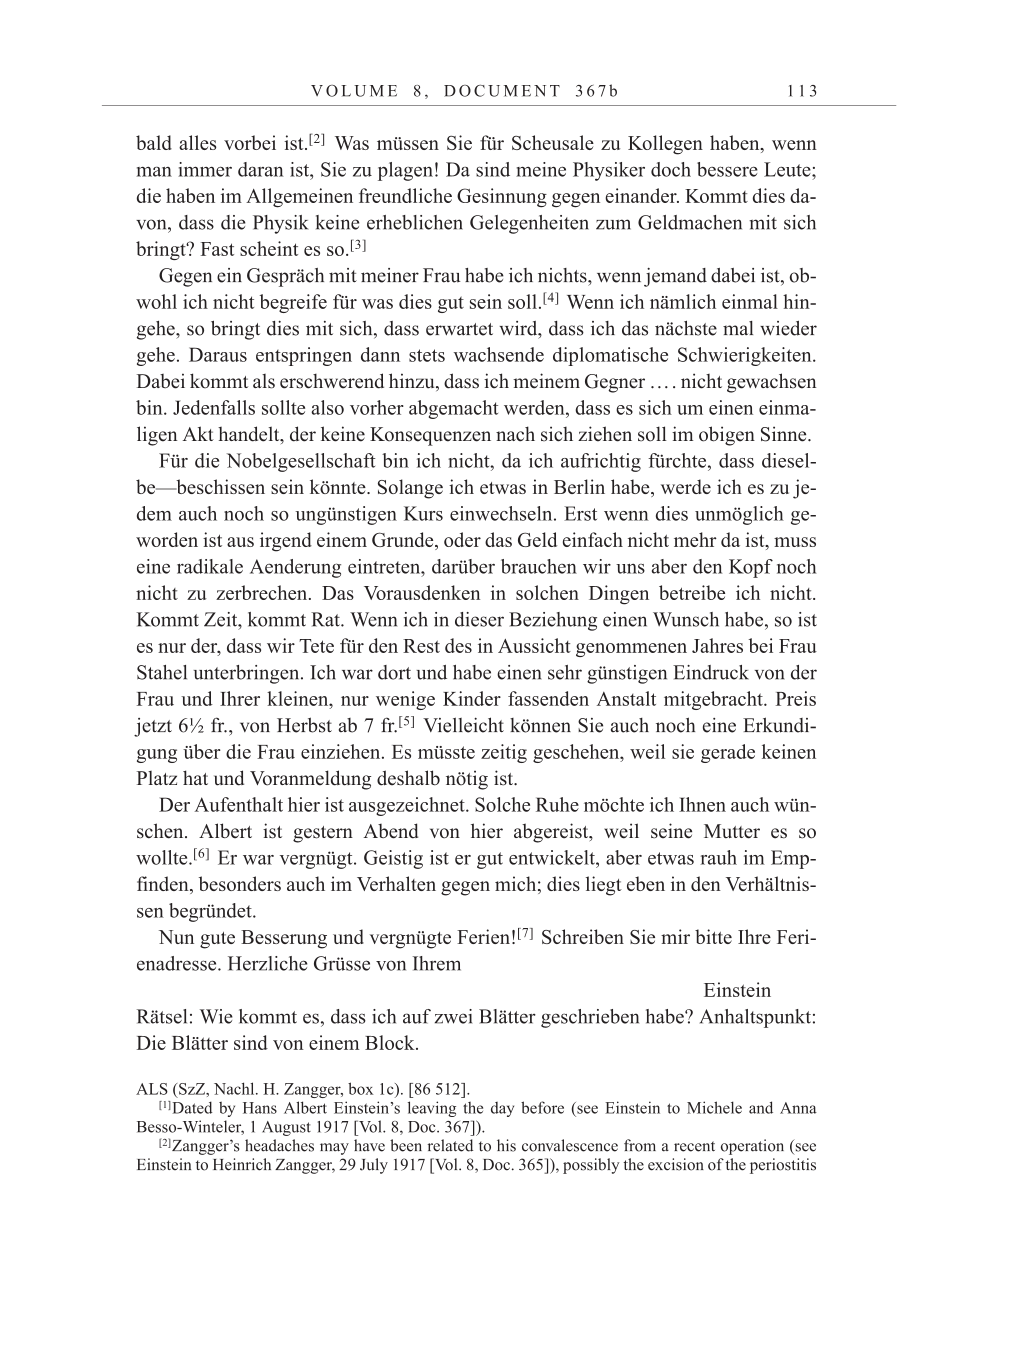 Volume 10: The Berlin Years: Correspondence May-December 1920 / Supplementary Correspondence 1909-1920 page 113